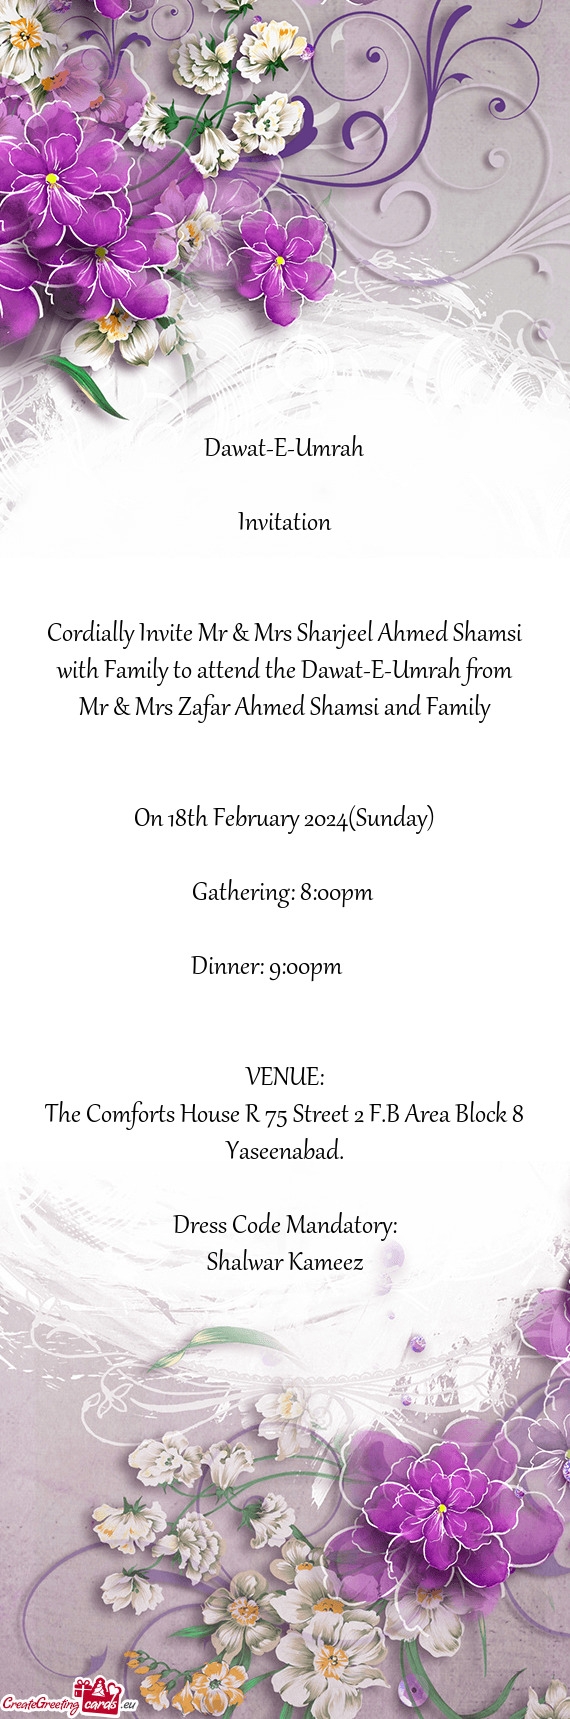 Cordially Invite Mr & Mrs Sharjeel Ahmed Shamsi with Family to attend the Dawat-E-Umrah from